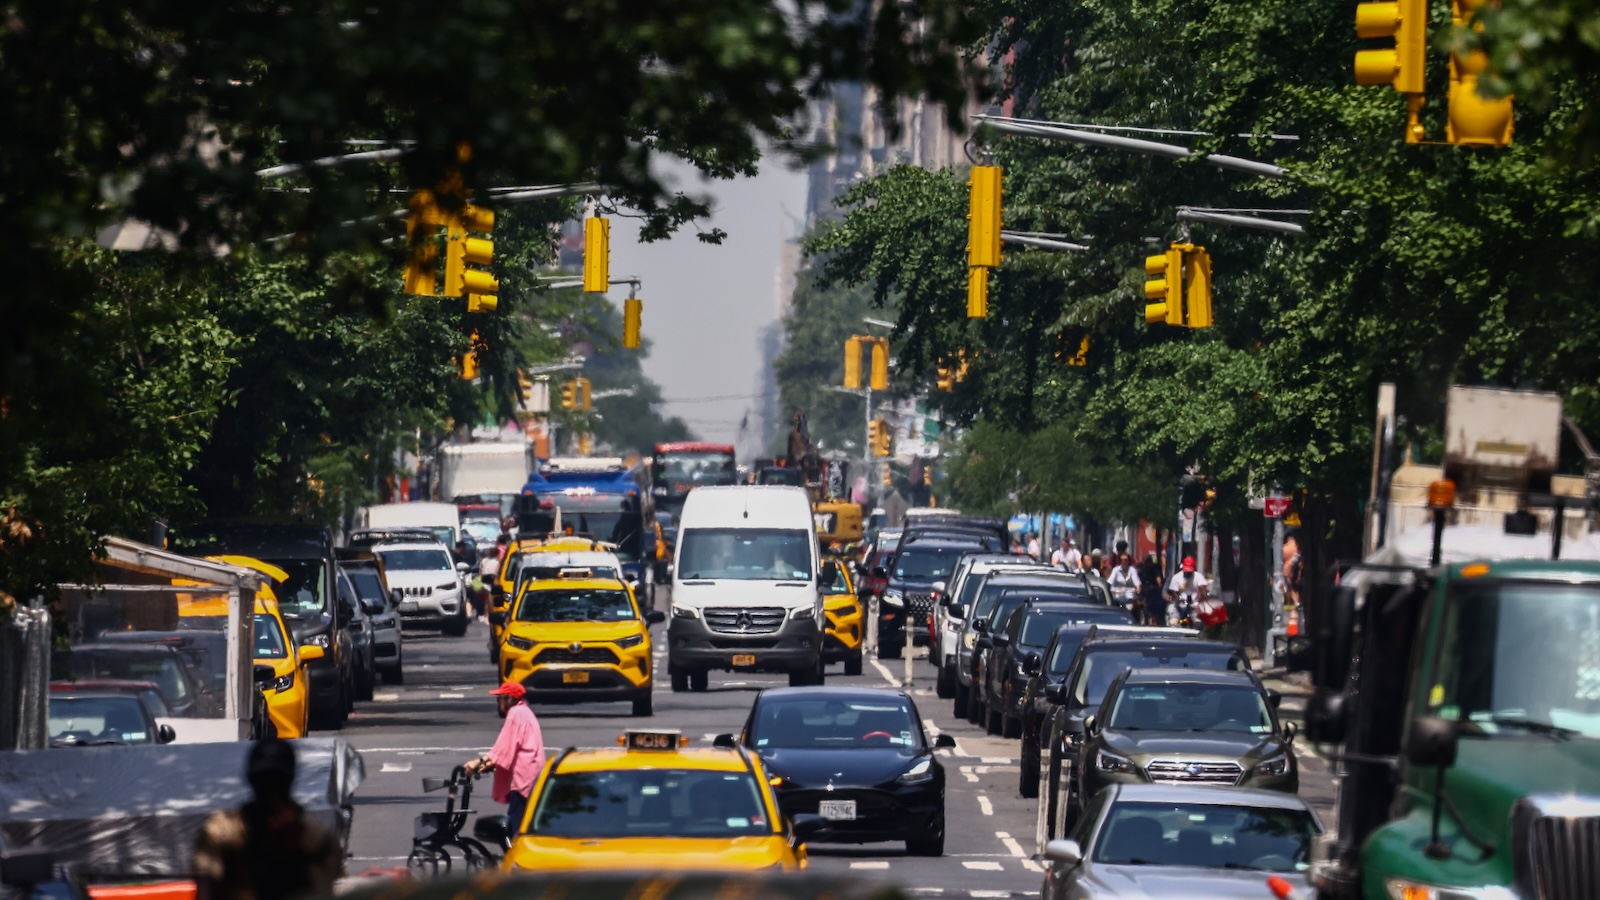 Heavy traffic and pedestrians are seen on Fifth Avenue in New York during a hazy day in July.